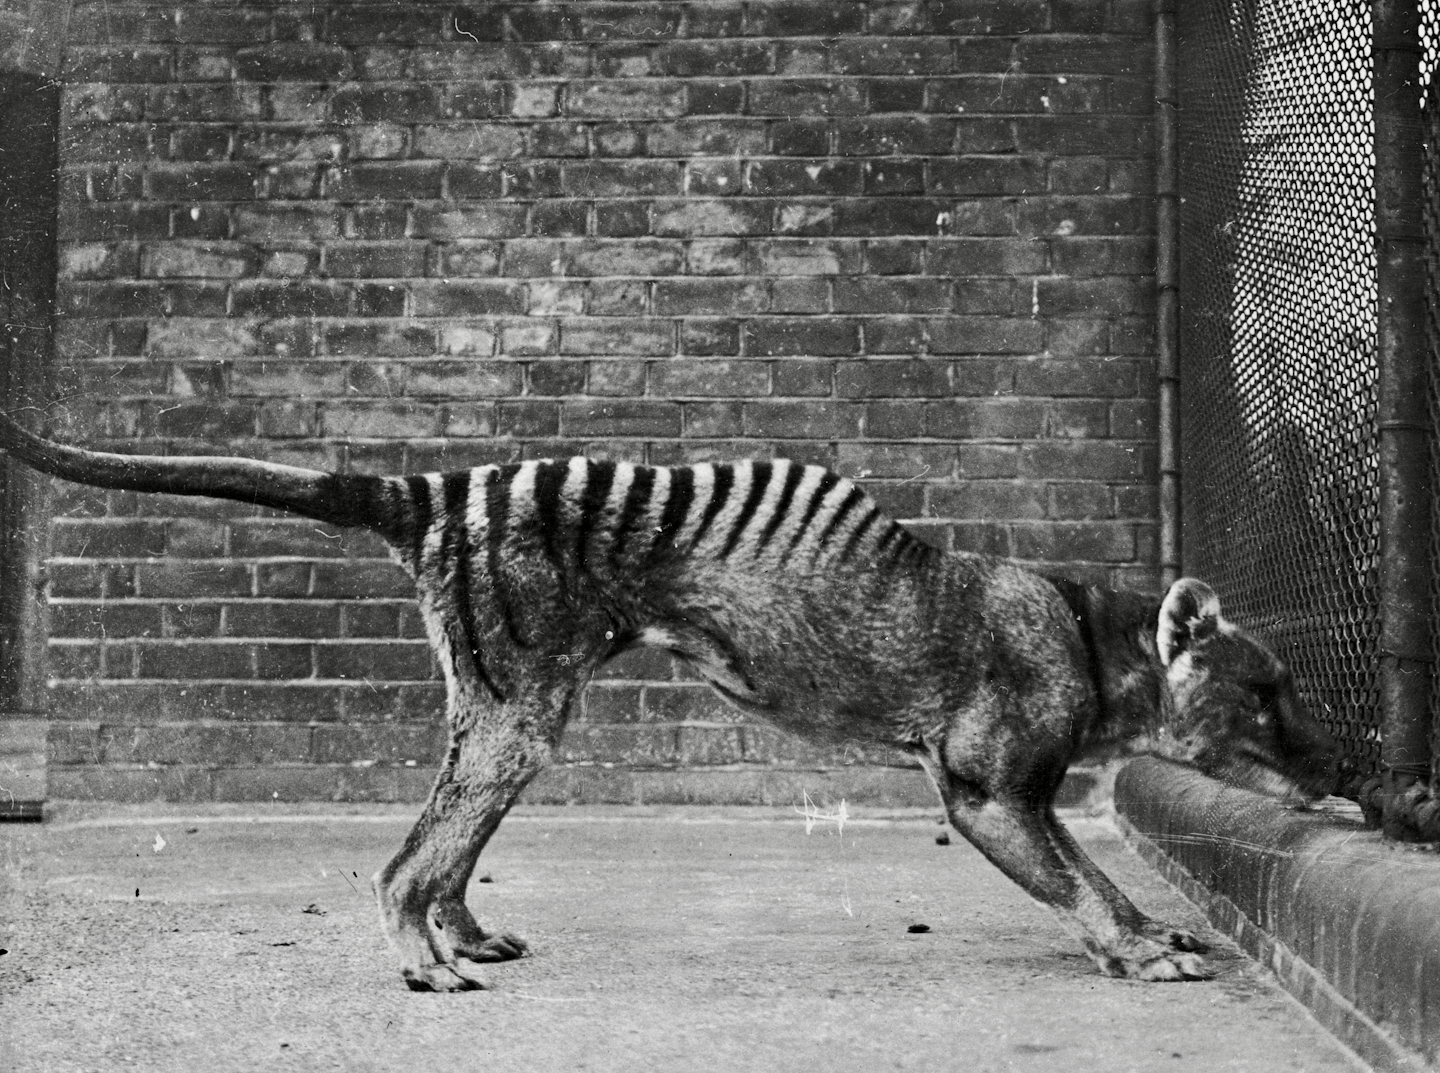 Black and white photo of an animal that looks like a striped wolf in a brick and cement zoo enclosure.